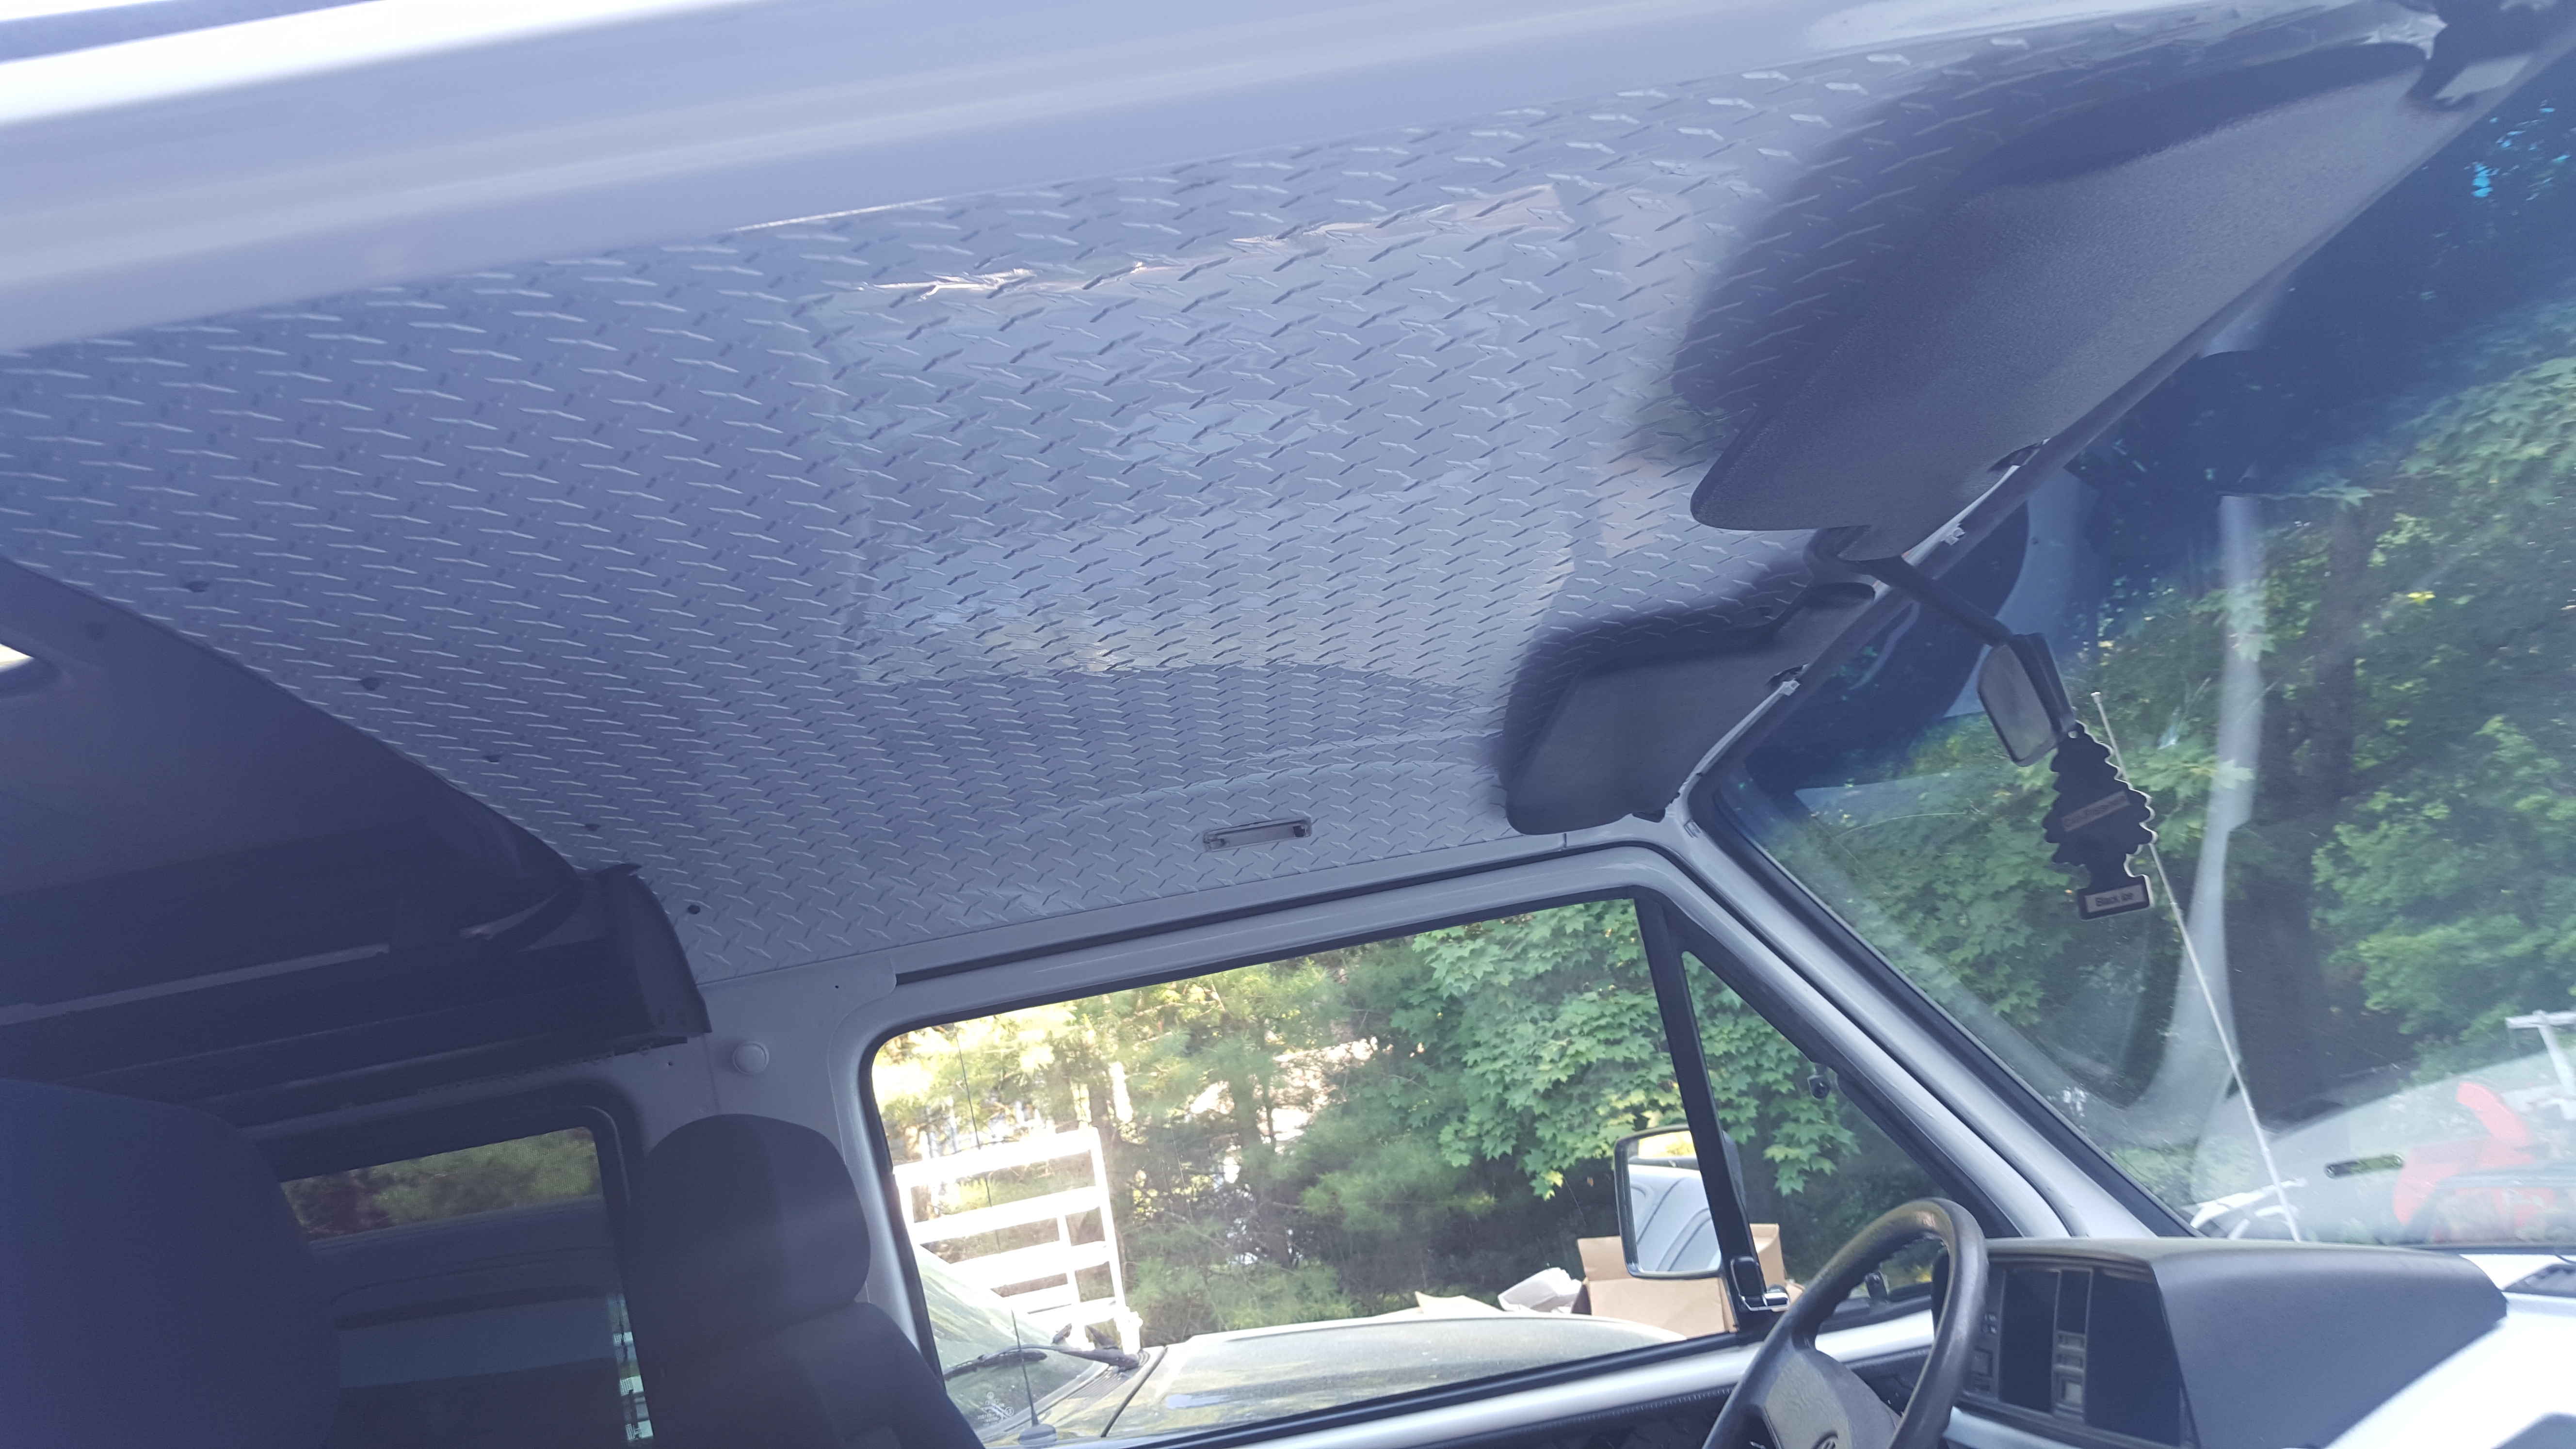 Roof of vehicle with diamond plate from CutsMetal